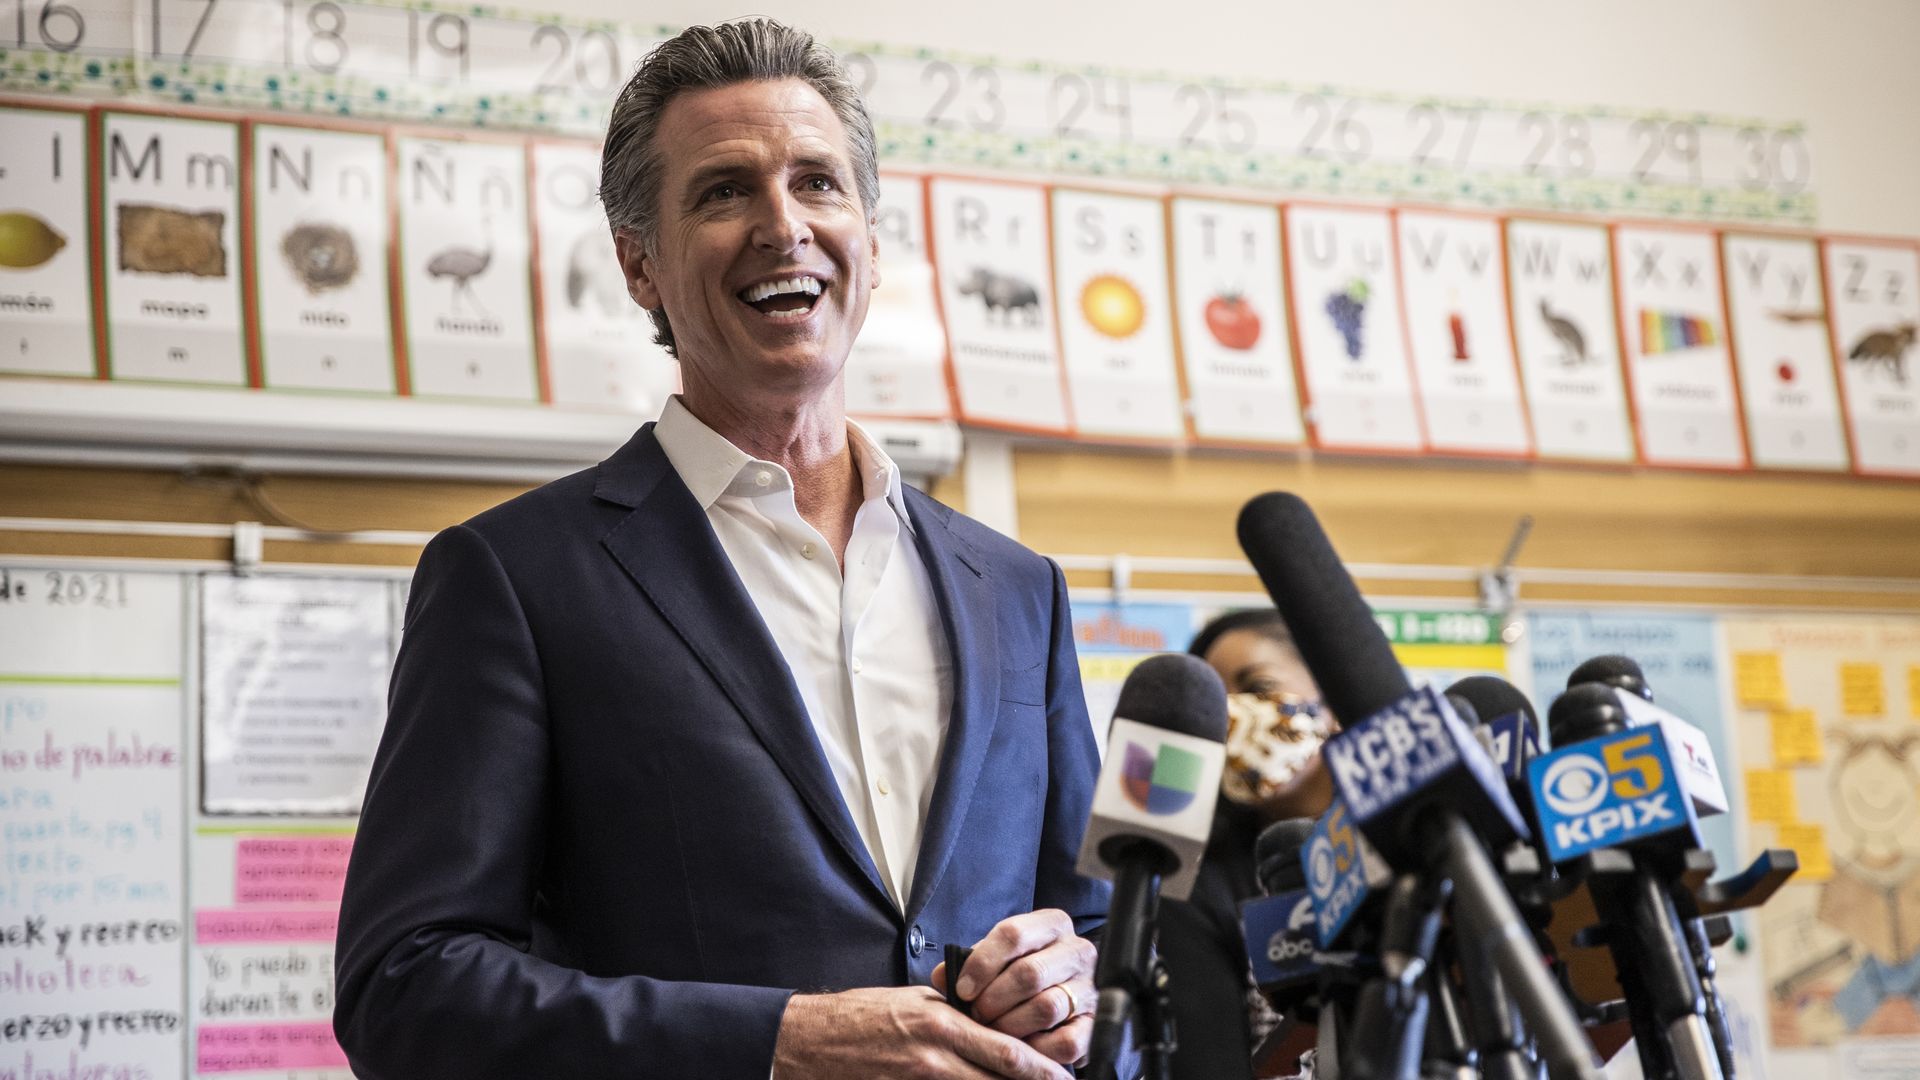 California Governor Gavin Newsom speaks to members of the media after meeting students at Melrose Leadership Academy during a school visit in Oakland, California on Wednesday, Sept. 15